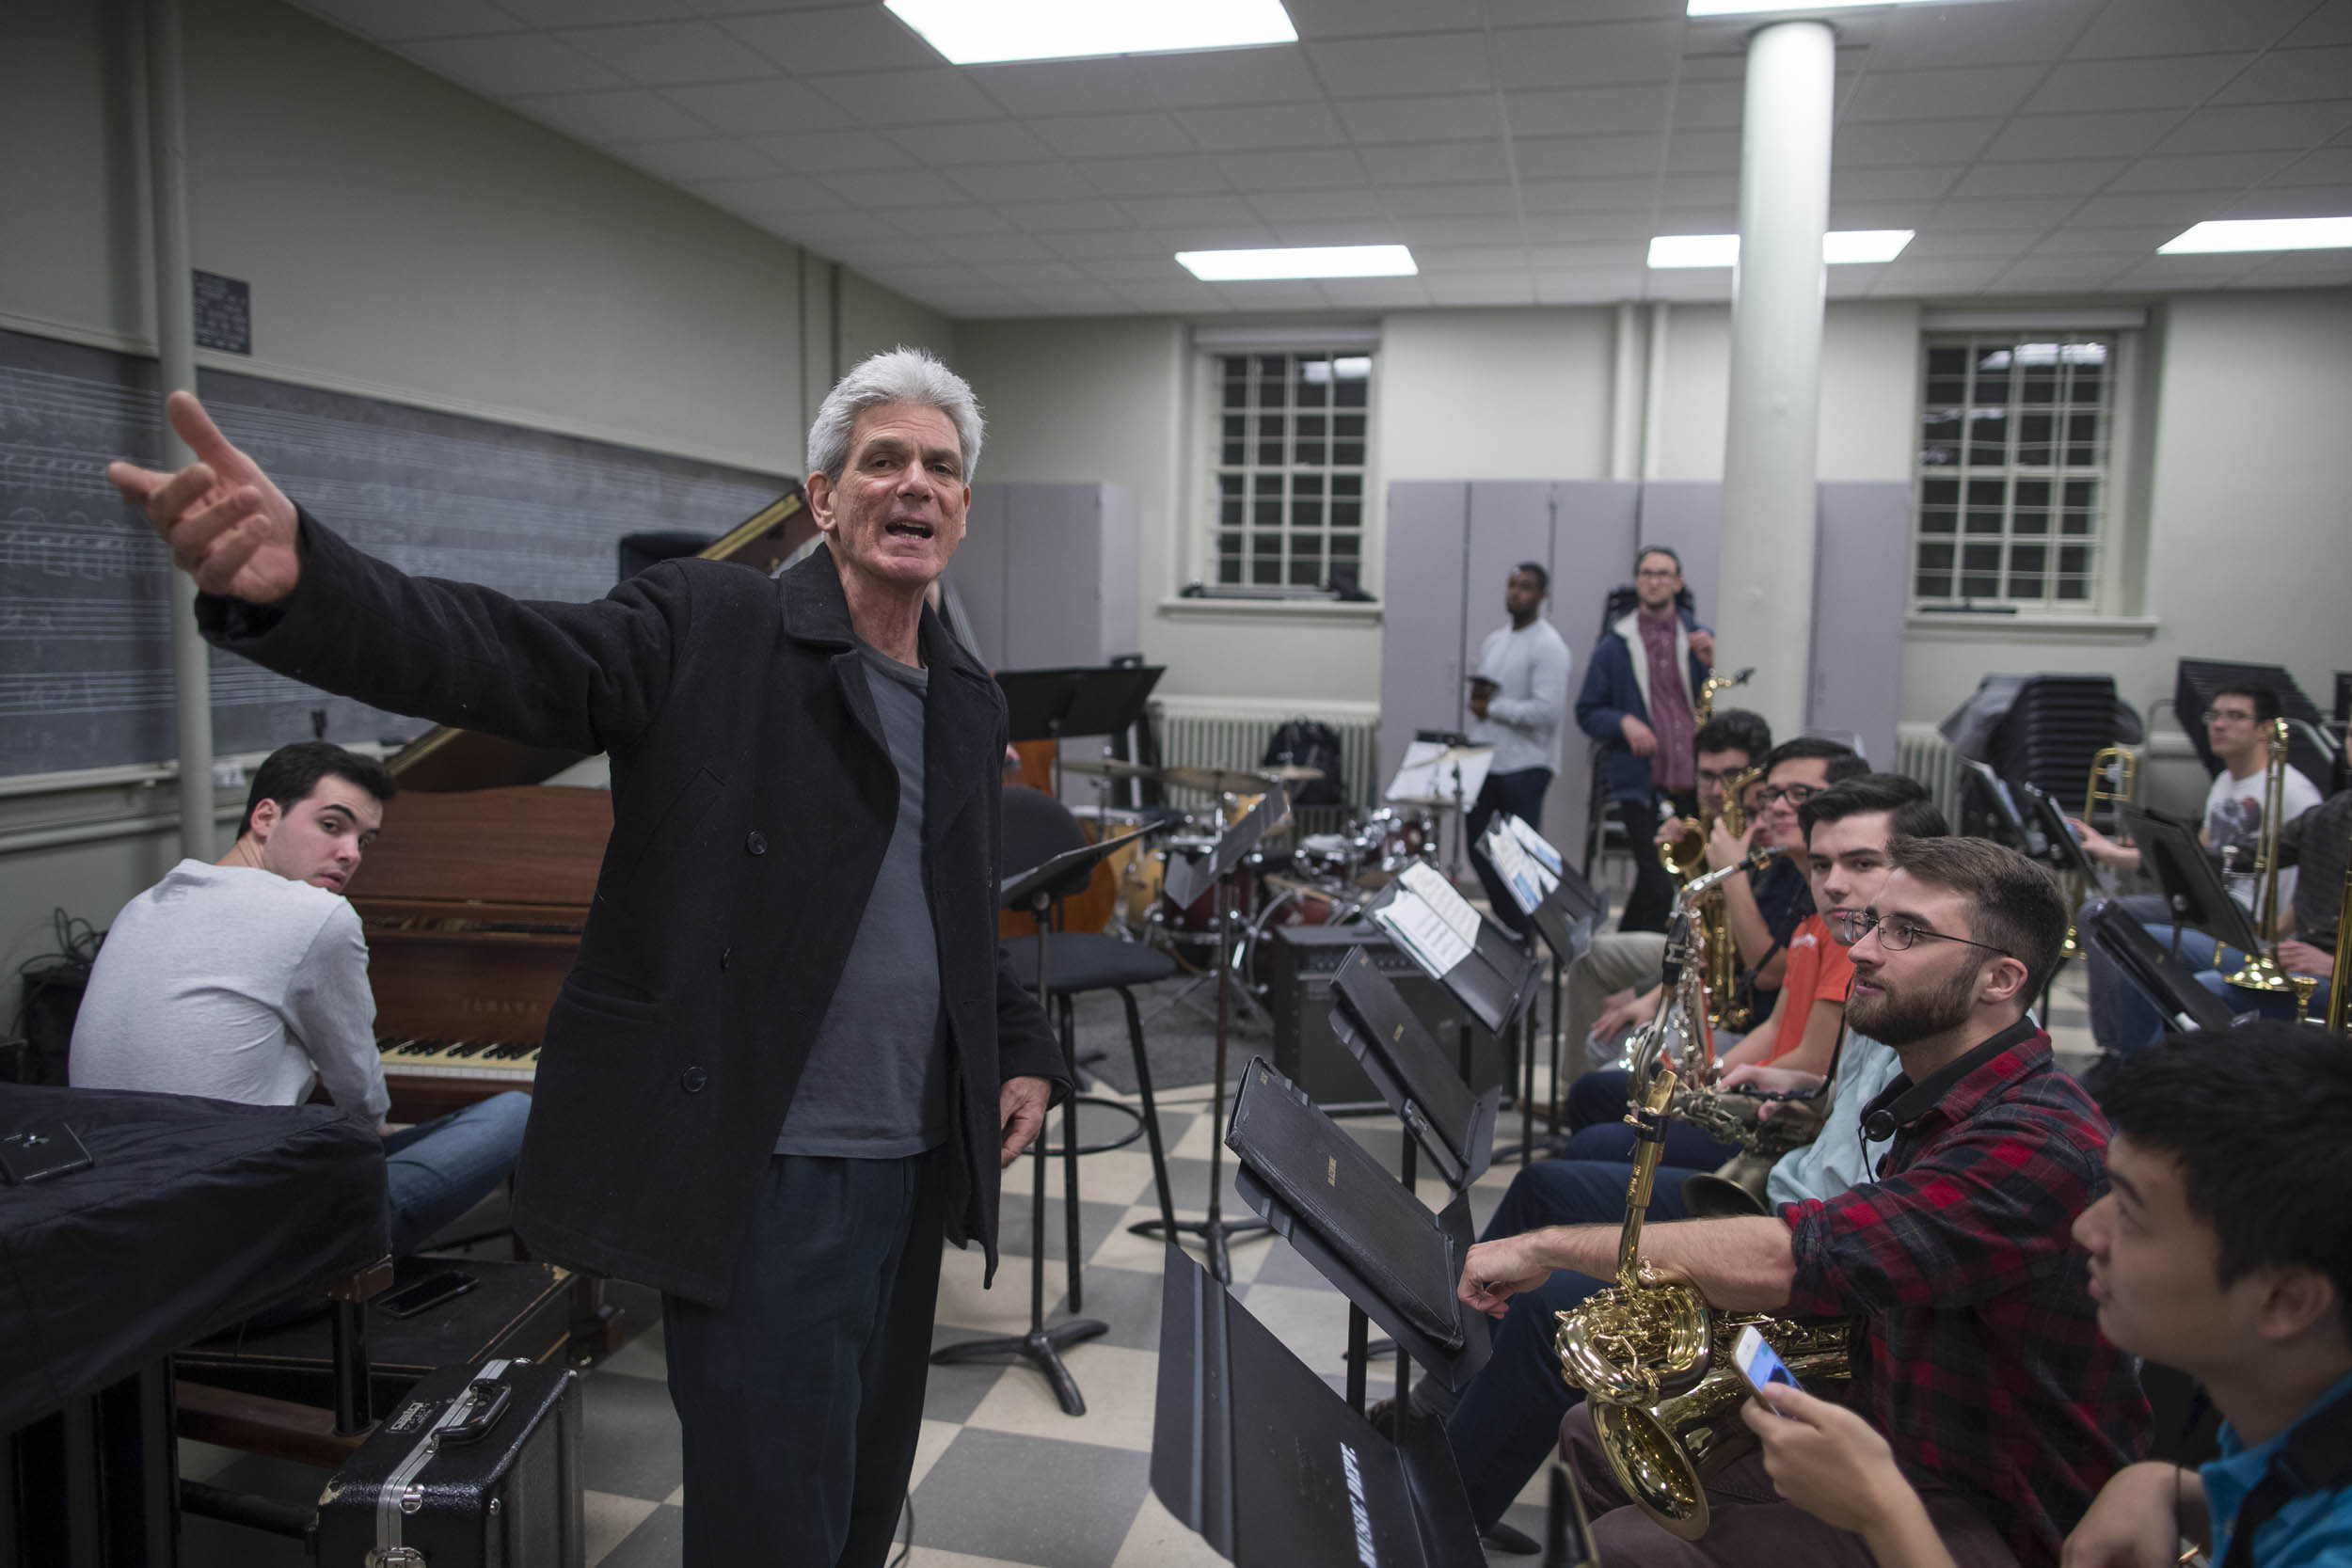 John D'earth of UVA's McIntire Department of Music said part of the ensemble's goal is to get students comfortable with improvising in a big band setting.